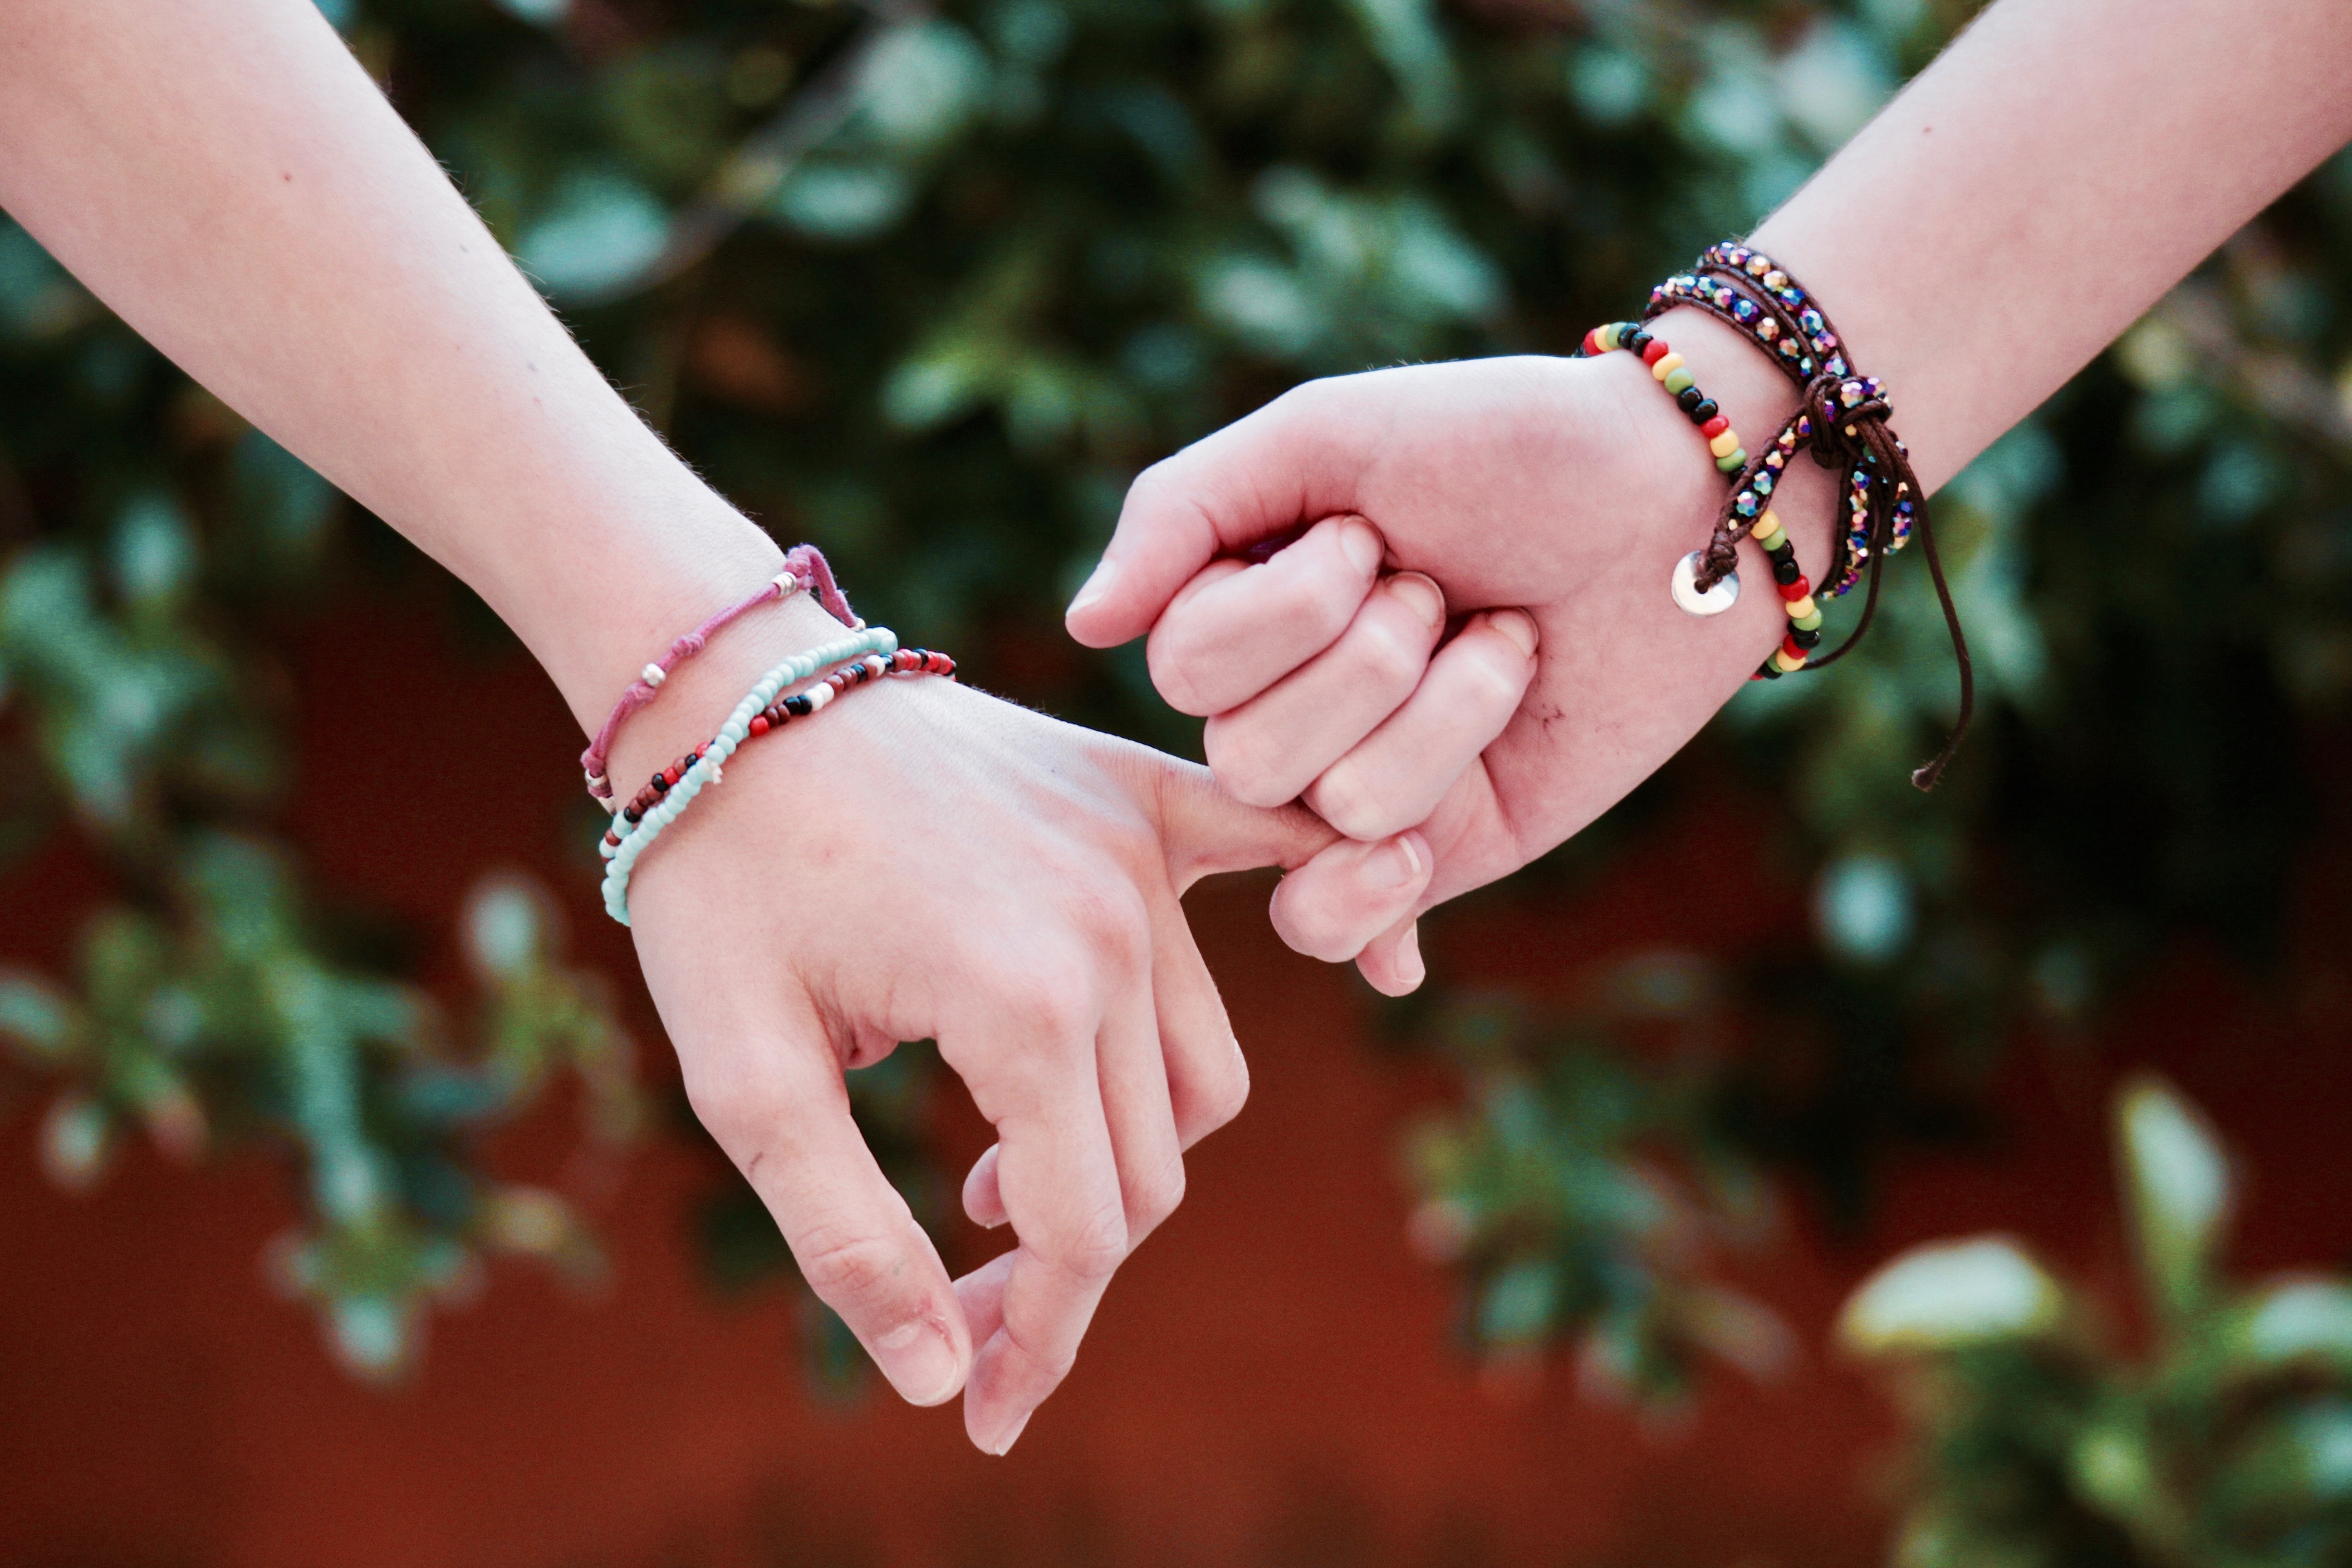 Two individuals holding each others' pinkies with friendship bracelets on. | Source: Pexels